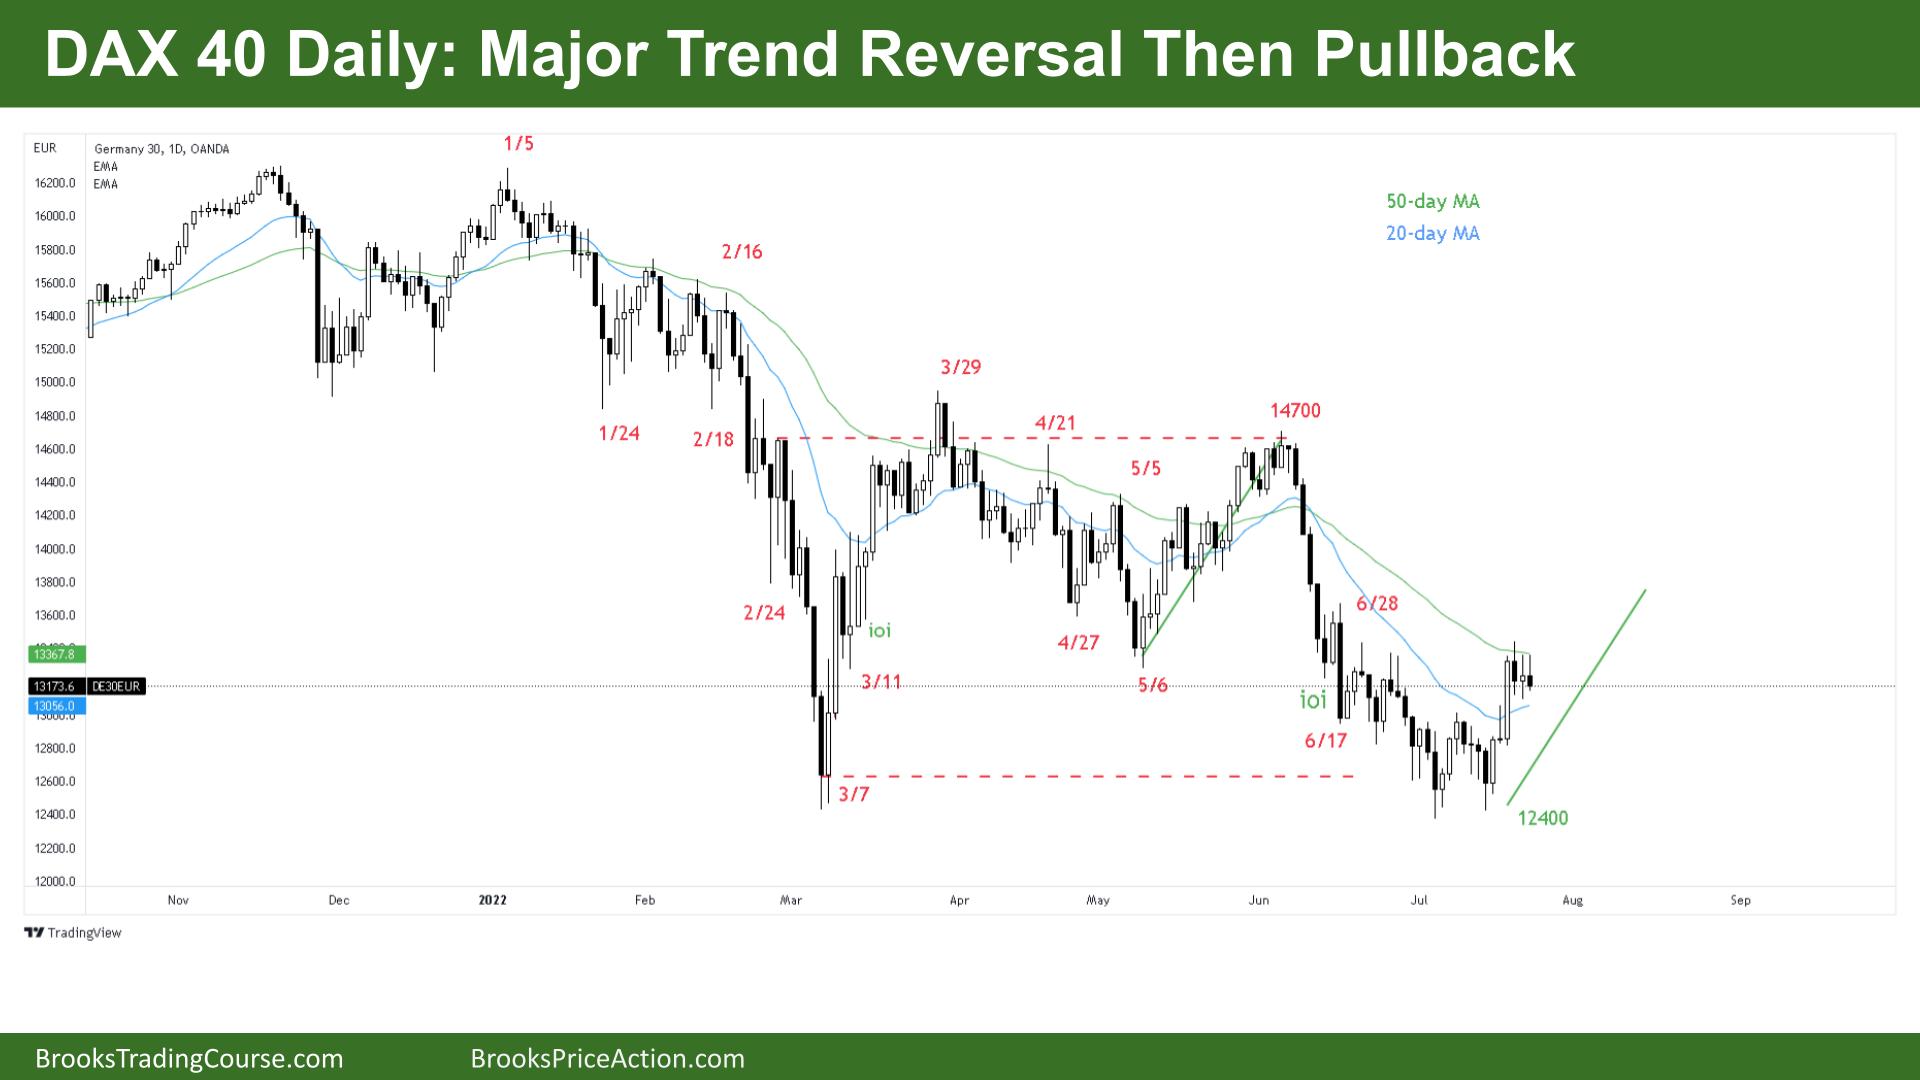 DAX-40 Daily Major Trend Reversal then Pullback